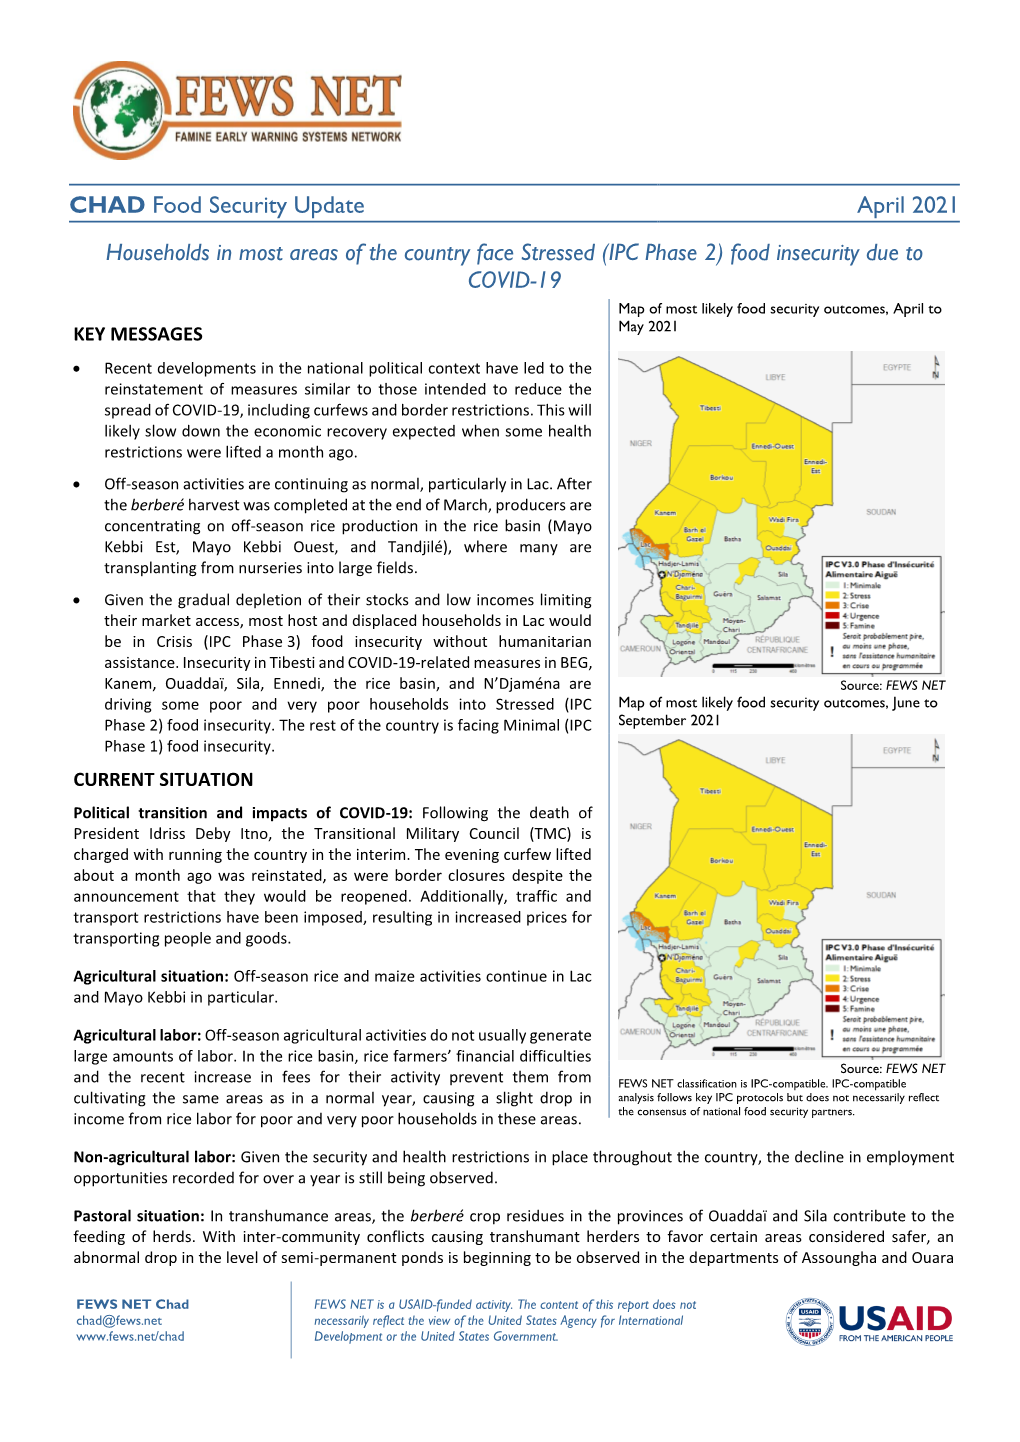 CHAD Food Security Update April 2021 Households in Most Areas Of